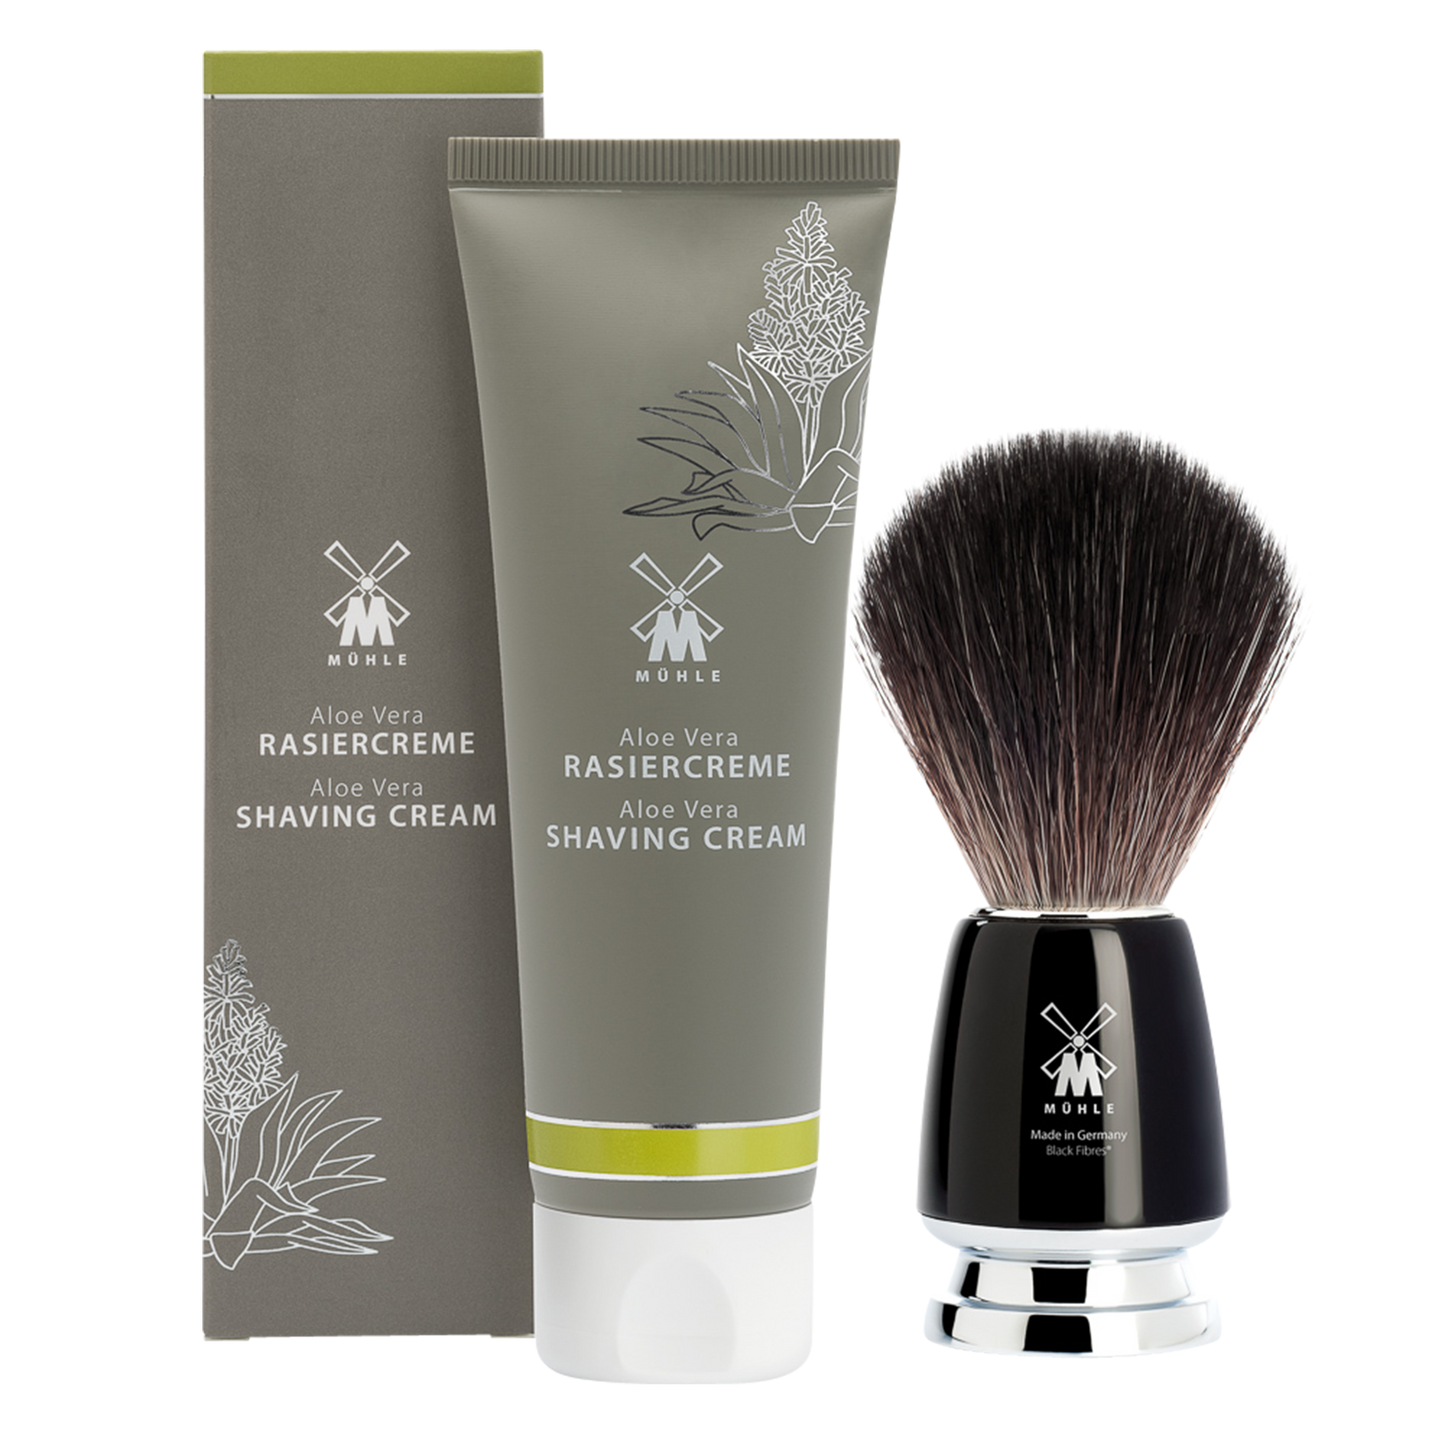 MUHLE Starter Set Aloe Vera Shaving Cream & Rytmo Black Fiber Shaving Brush: Especially suitable for sensitive skin. The actual aloe vera substance is extracted from the inside of cultivated aloe plants of the Mediterranean area. The natural ingredients calm and refresh the skin and the senses during shaving. Aloe vera, gentle and caring. With fine fragrance notes of oakmoss and mint.